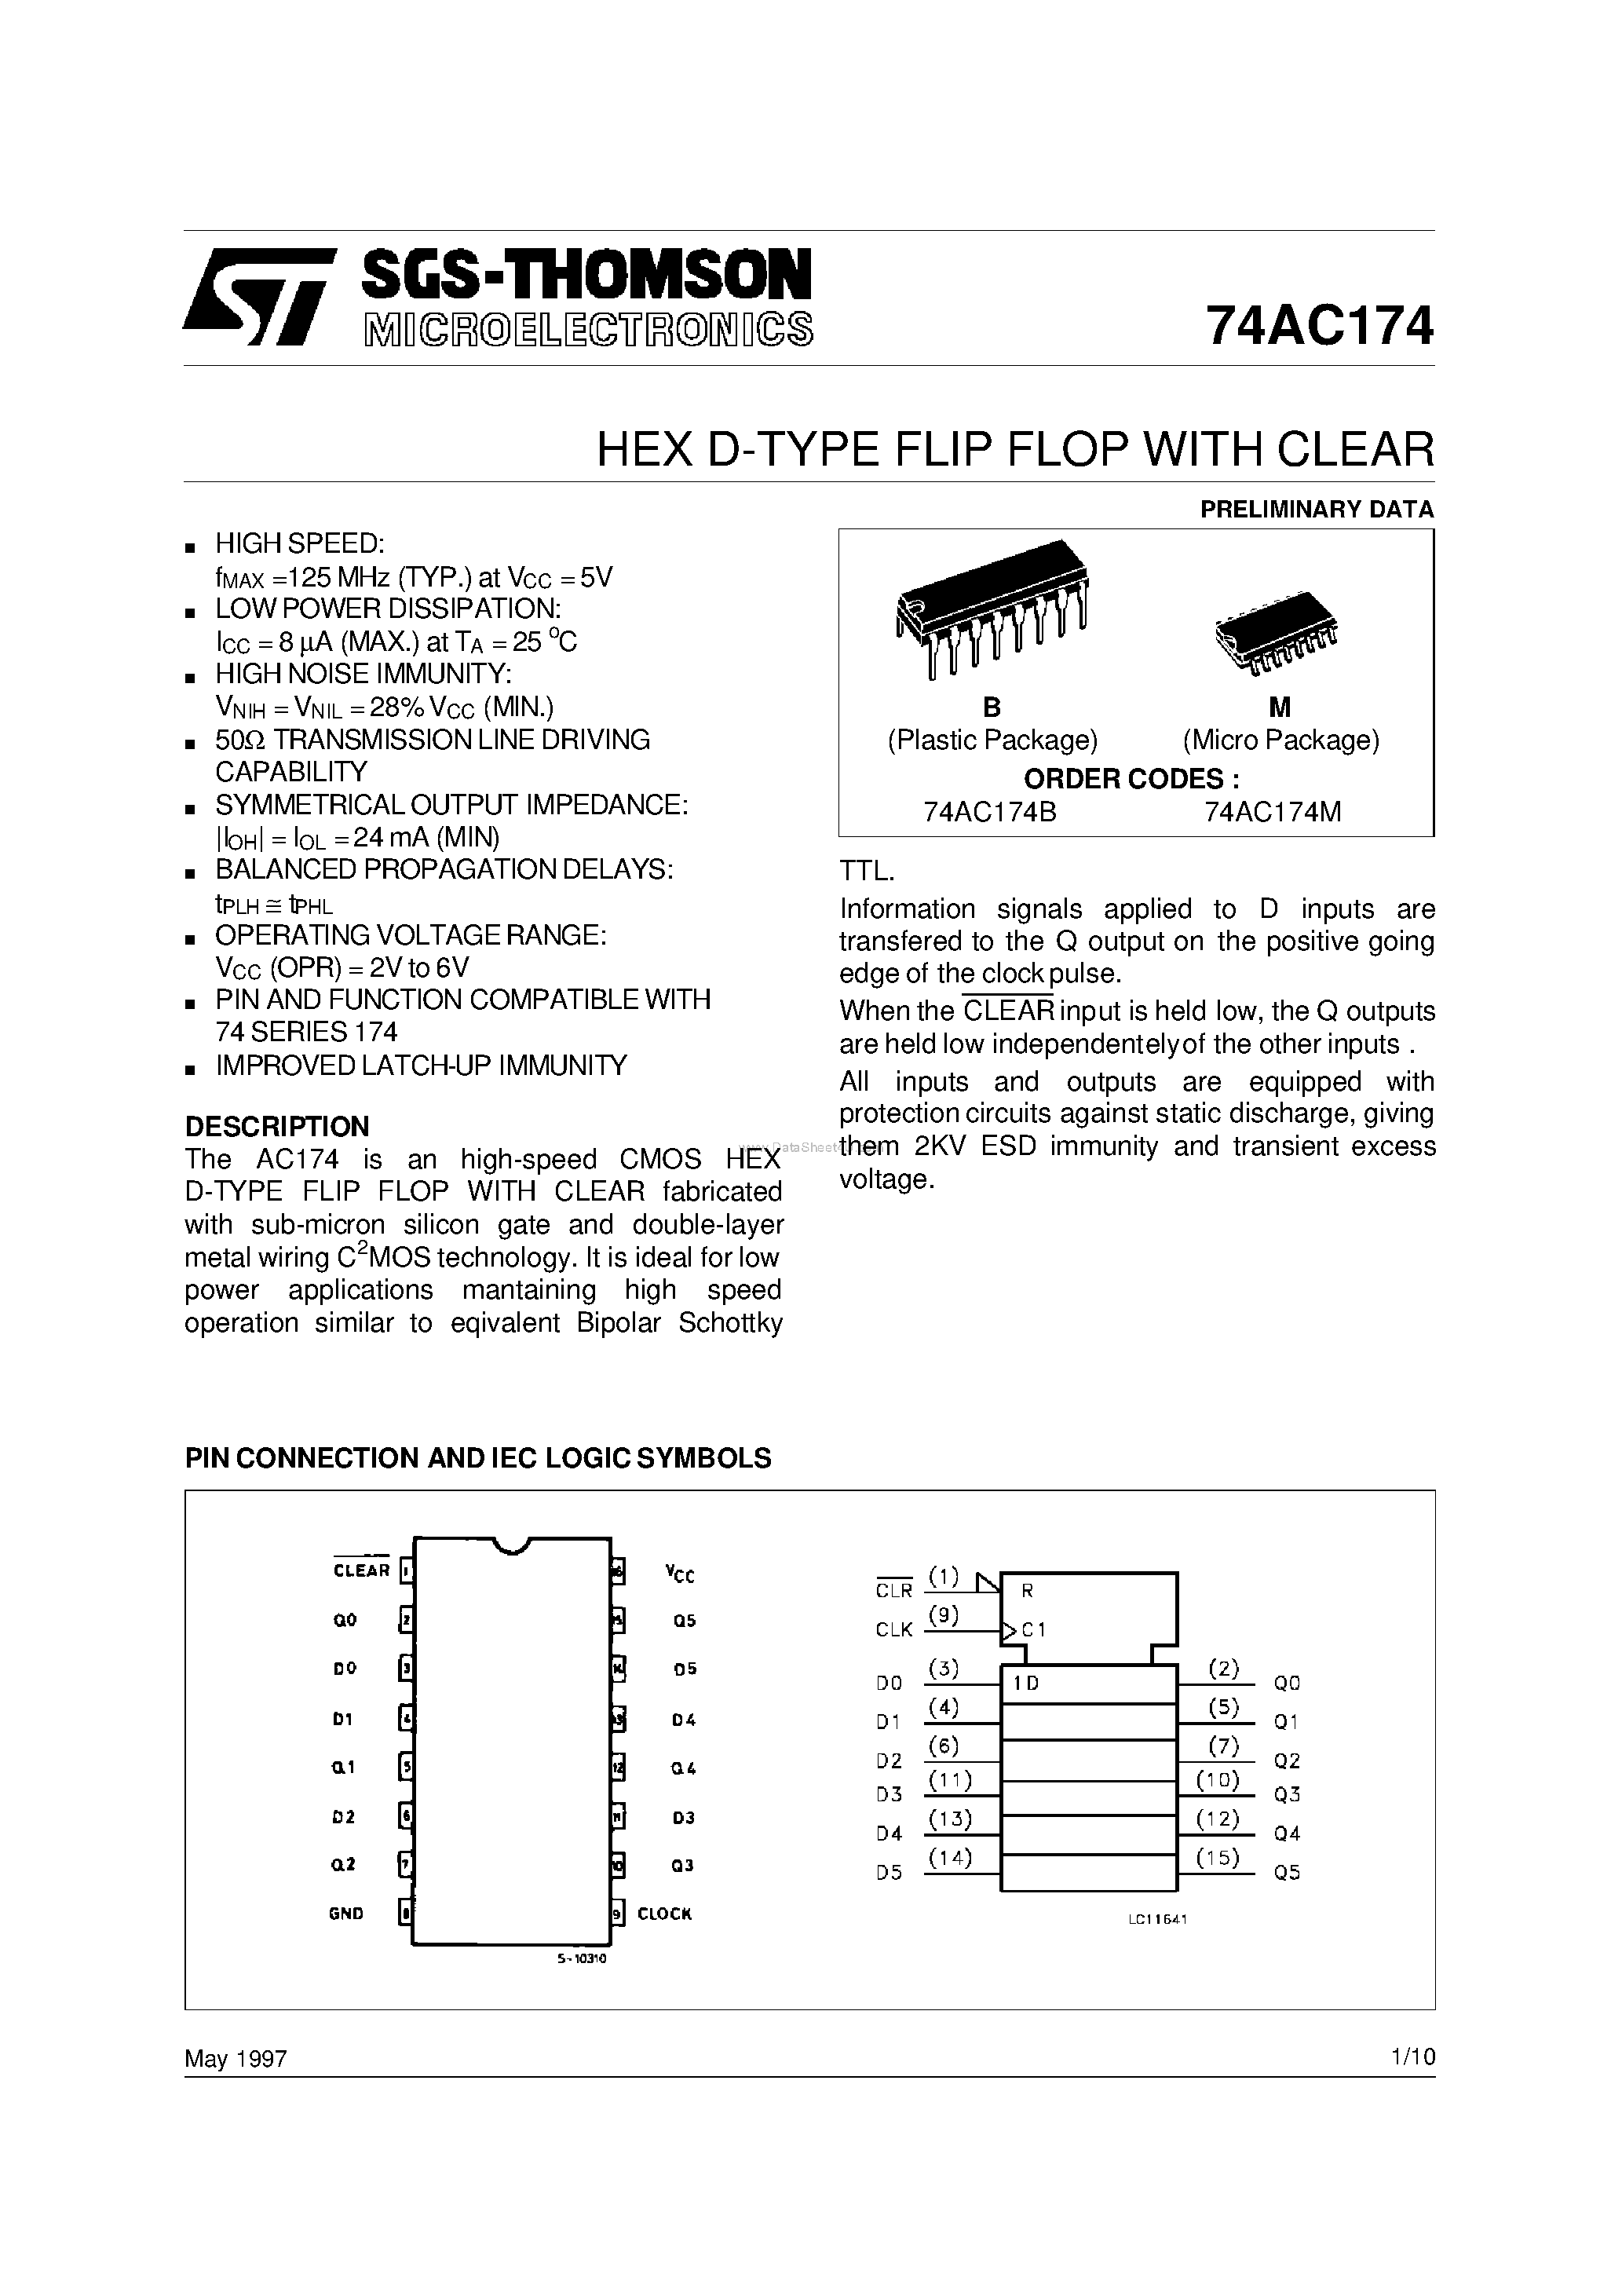 Datasheet 74AC174 - HEX D-TYPE FLIP FLOP WITH CLEAR page 1